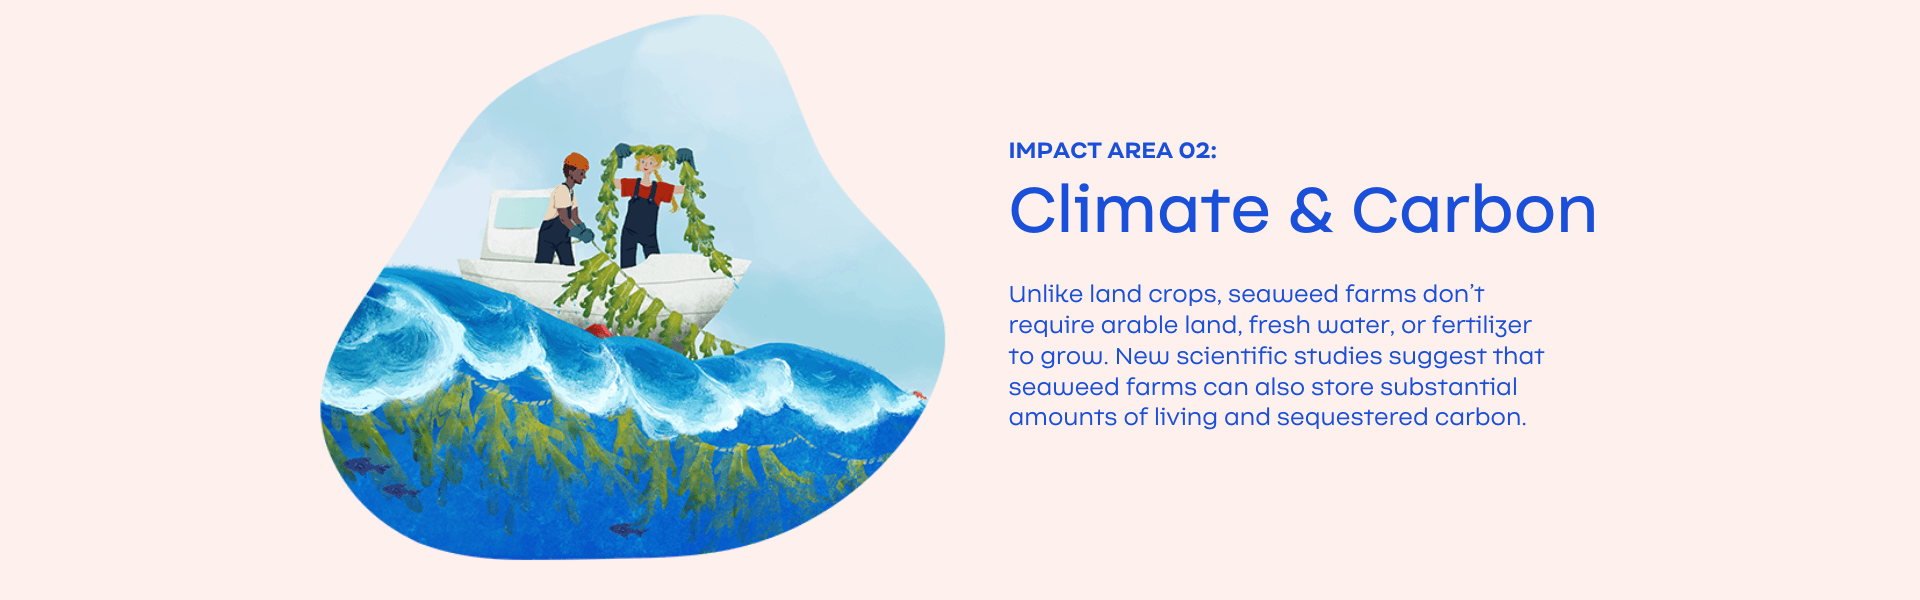 Impact-Slide-2_Climate-and-Carbon